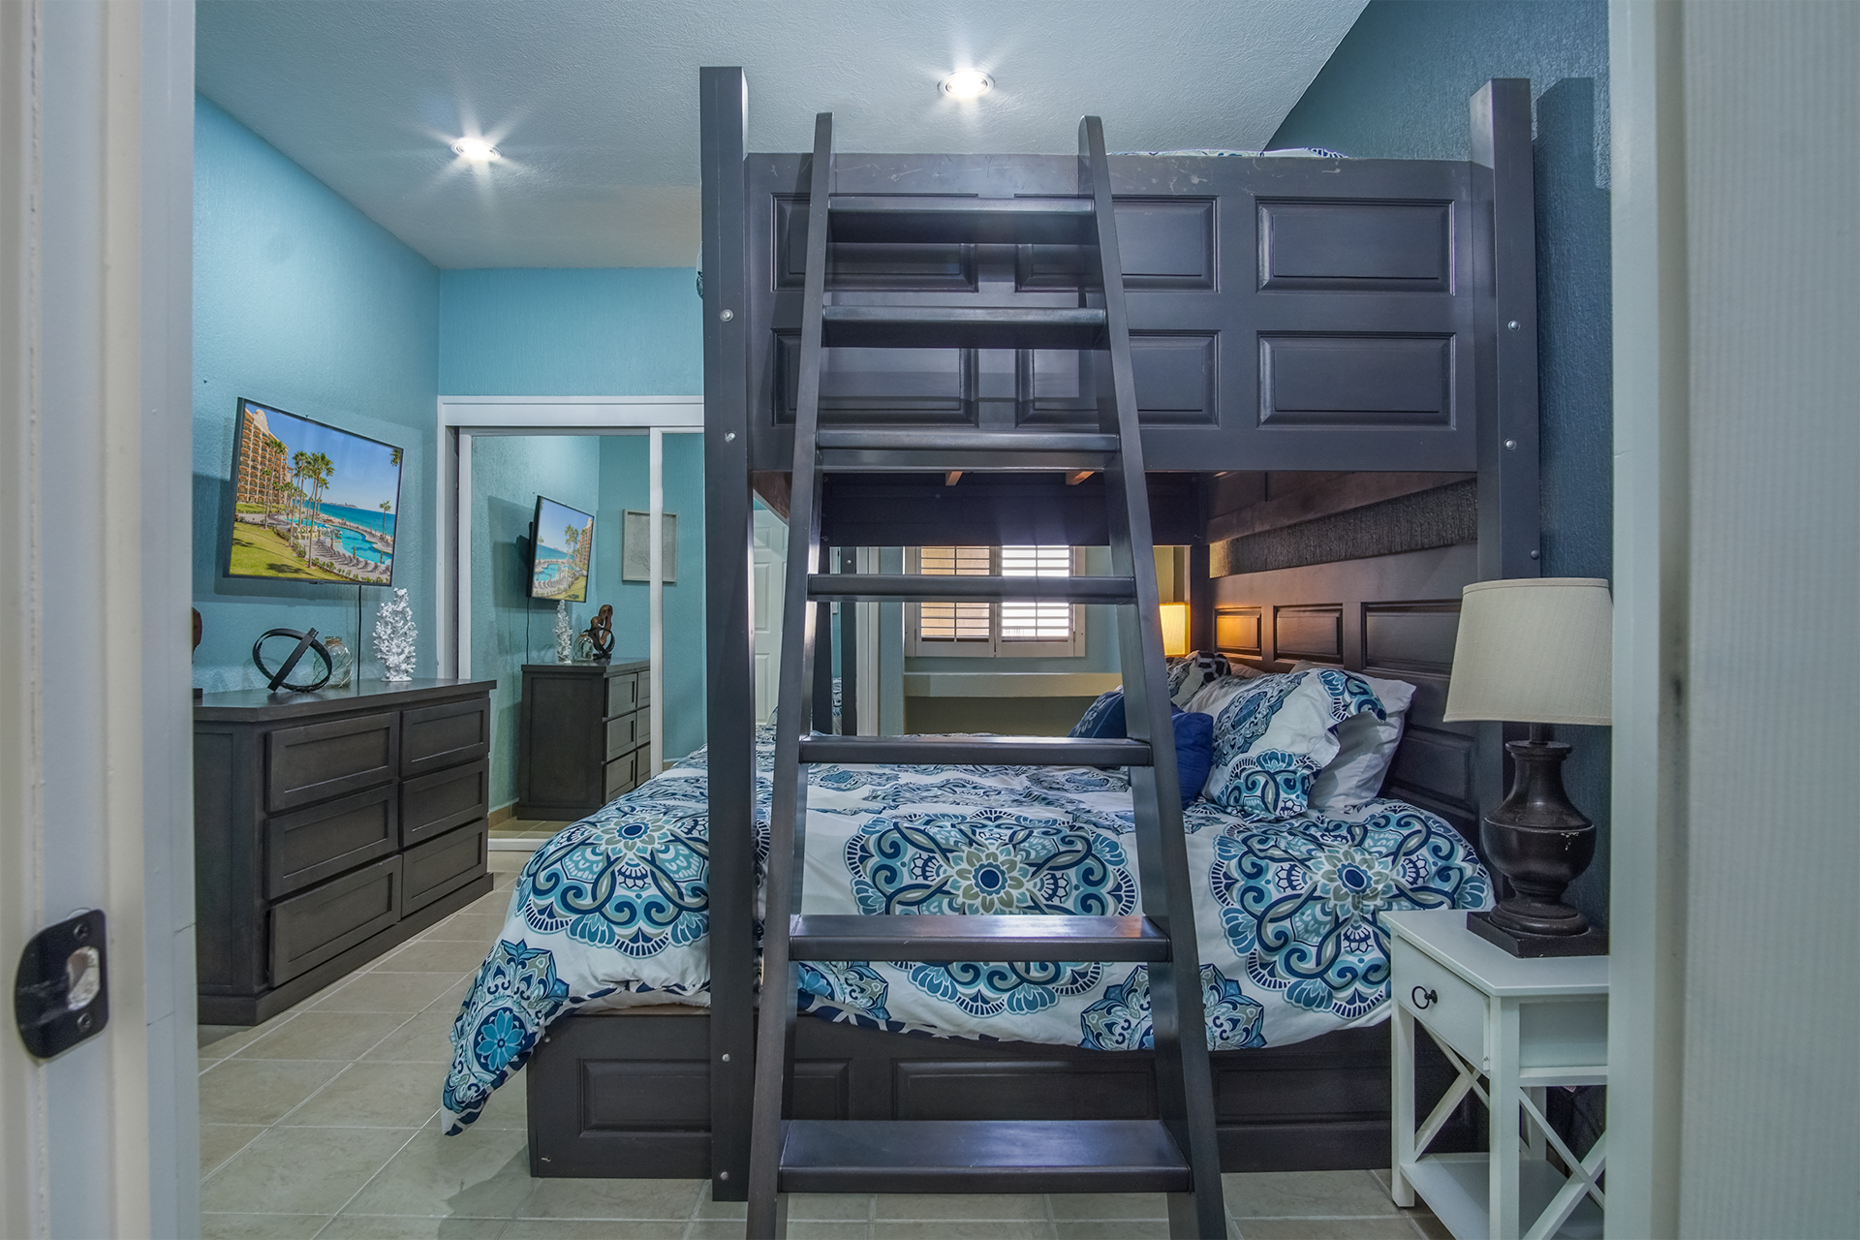 the bedroom with large bunk beds is great for. kids